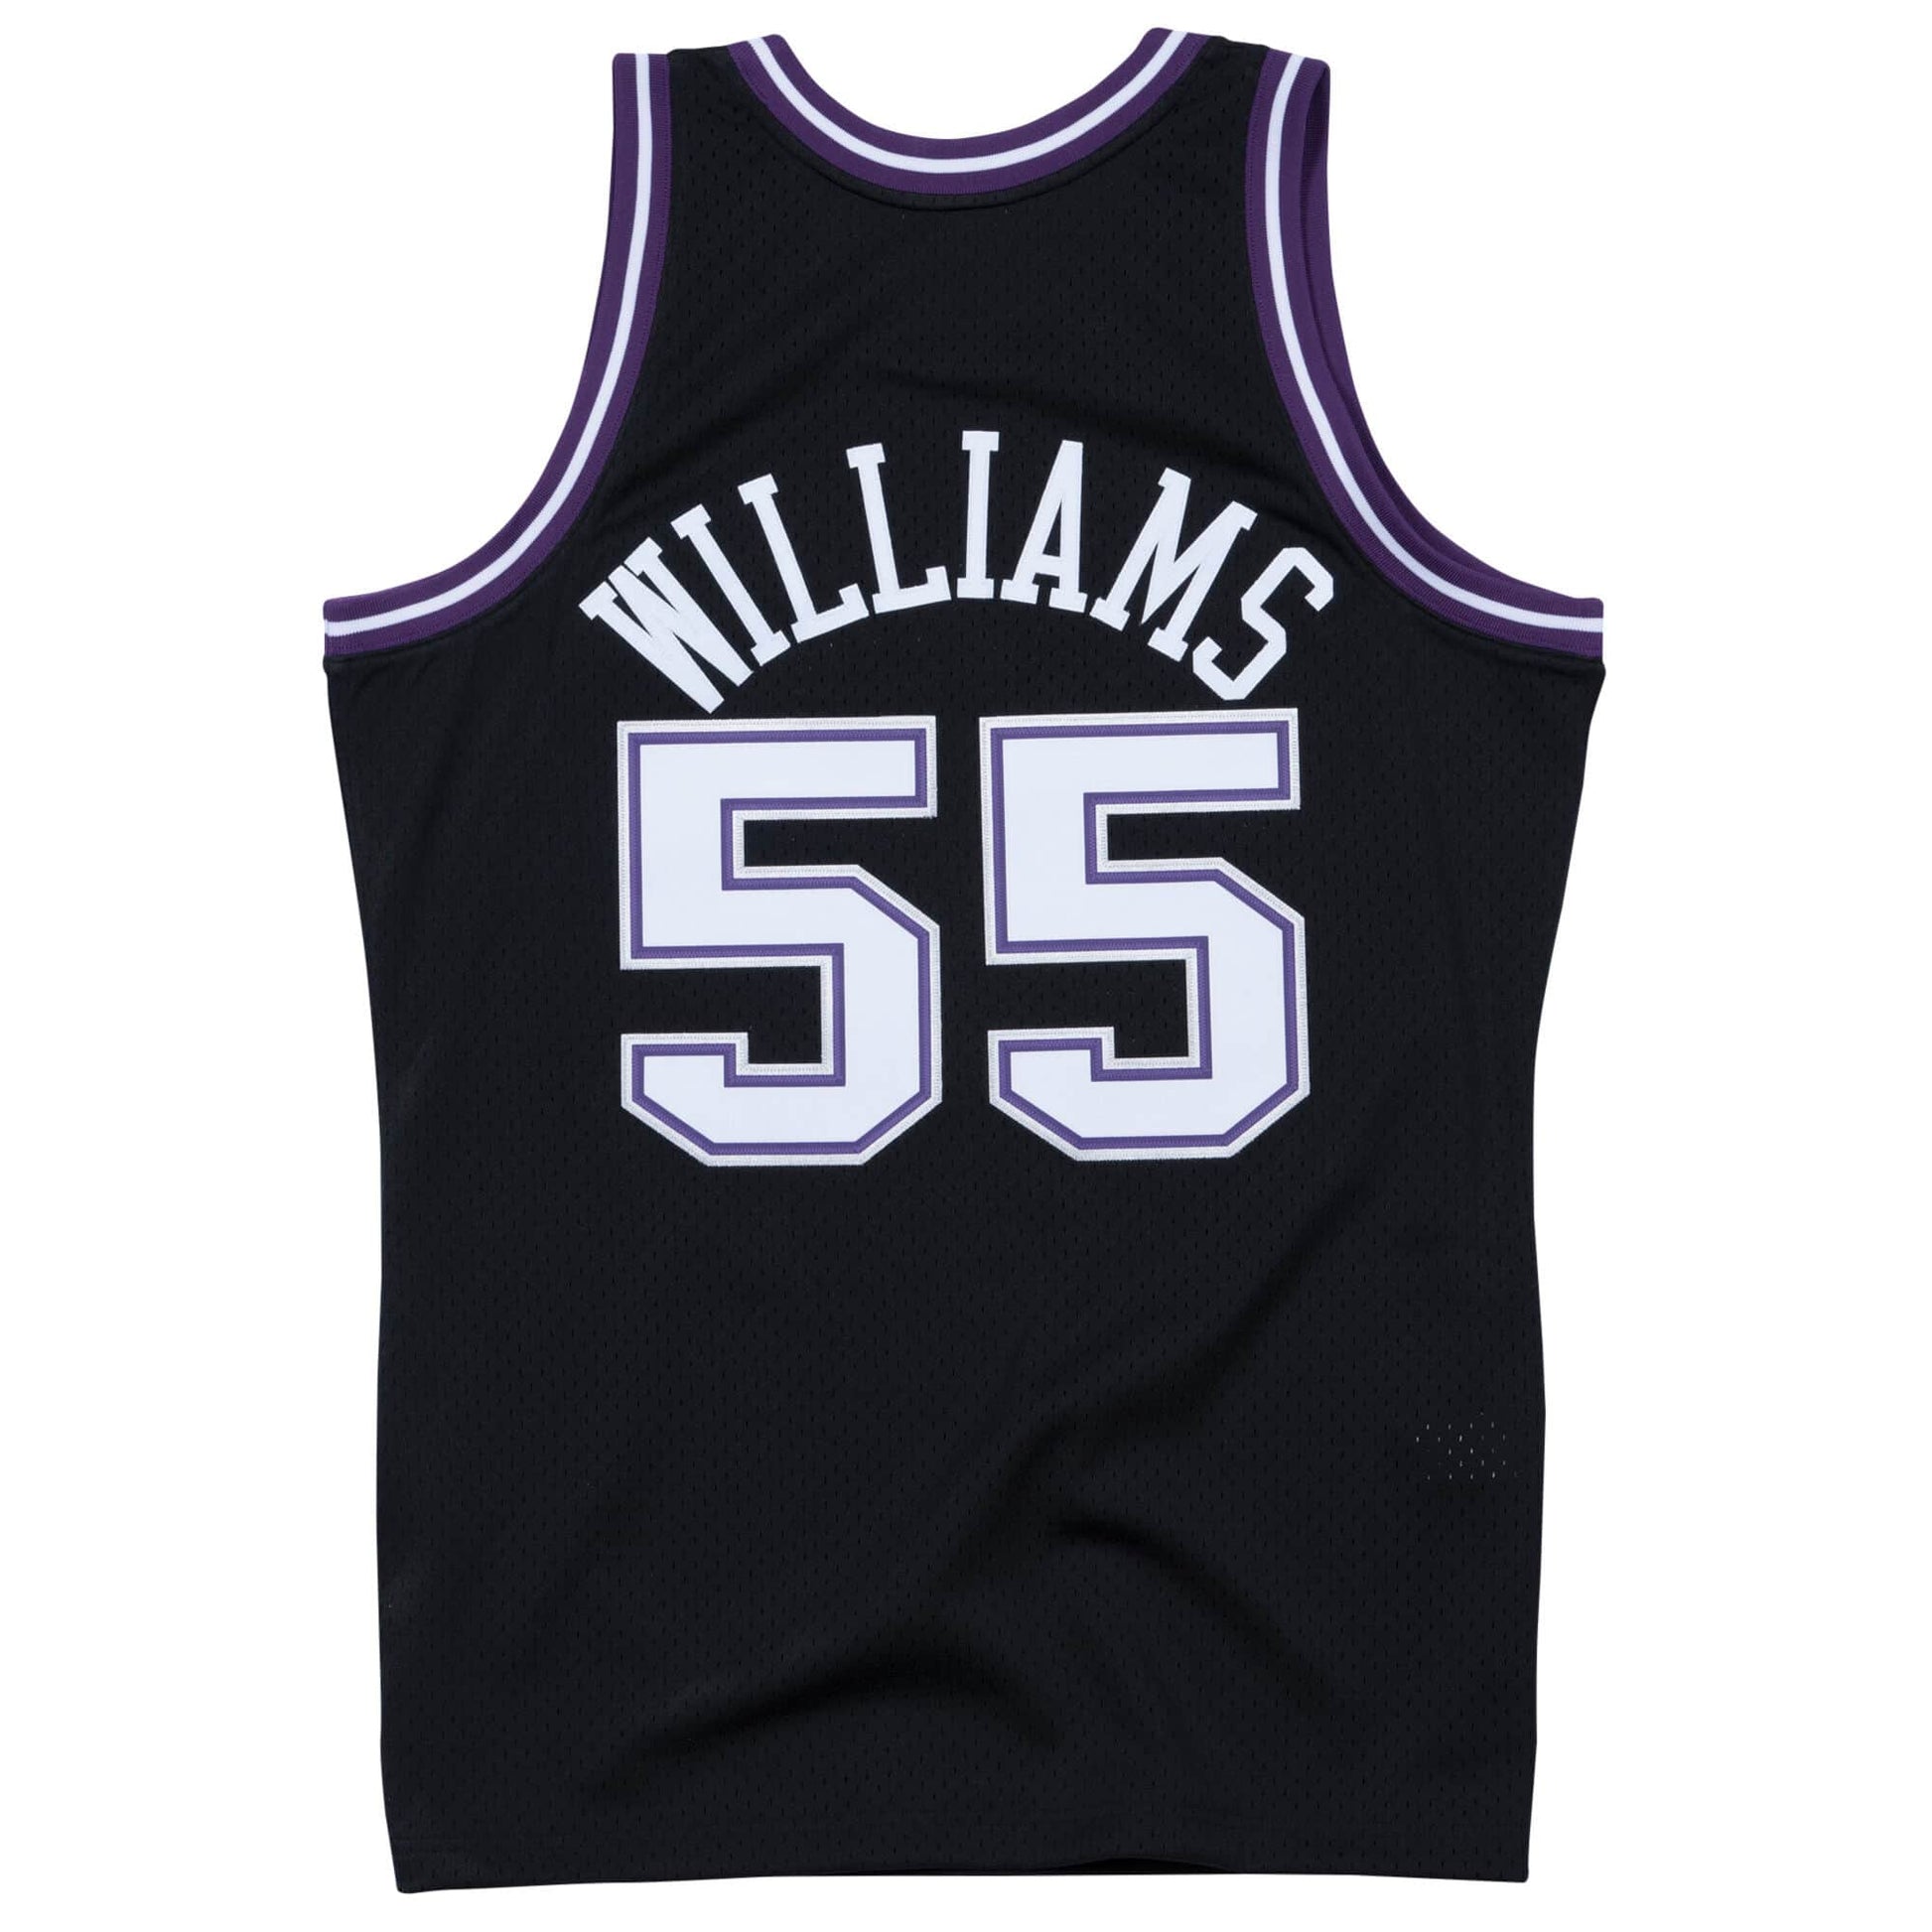 Why Jason Williams Should Have Been the 1999 Rookie of the Year